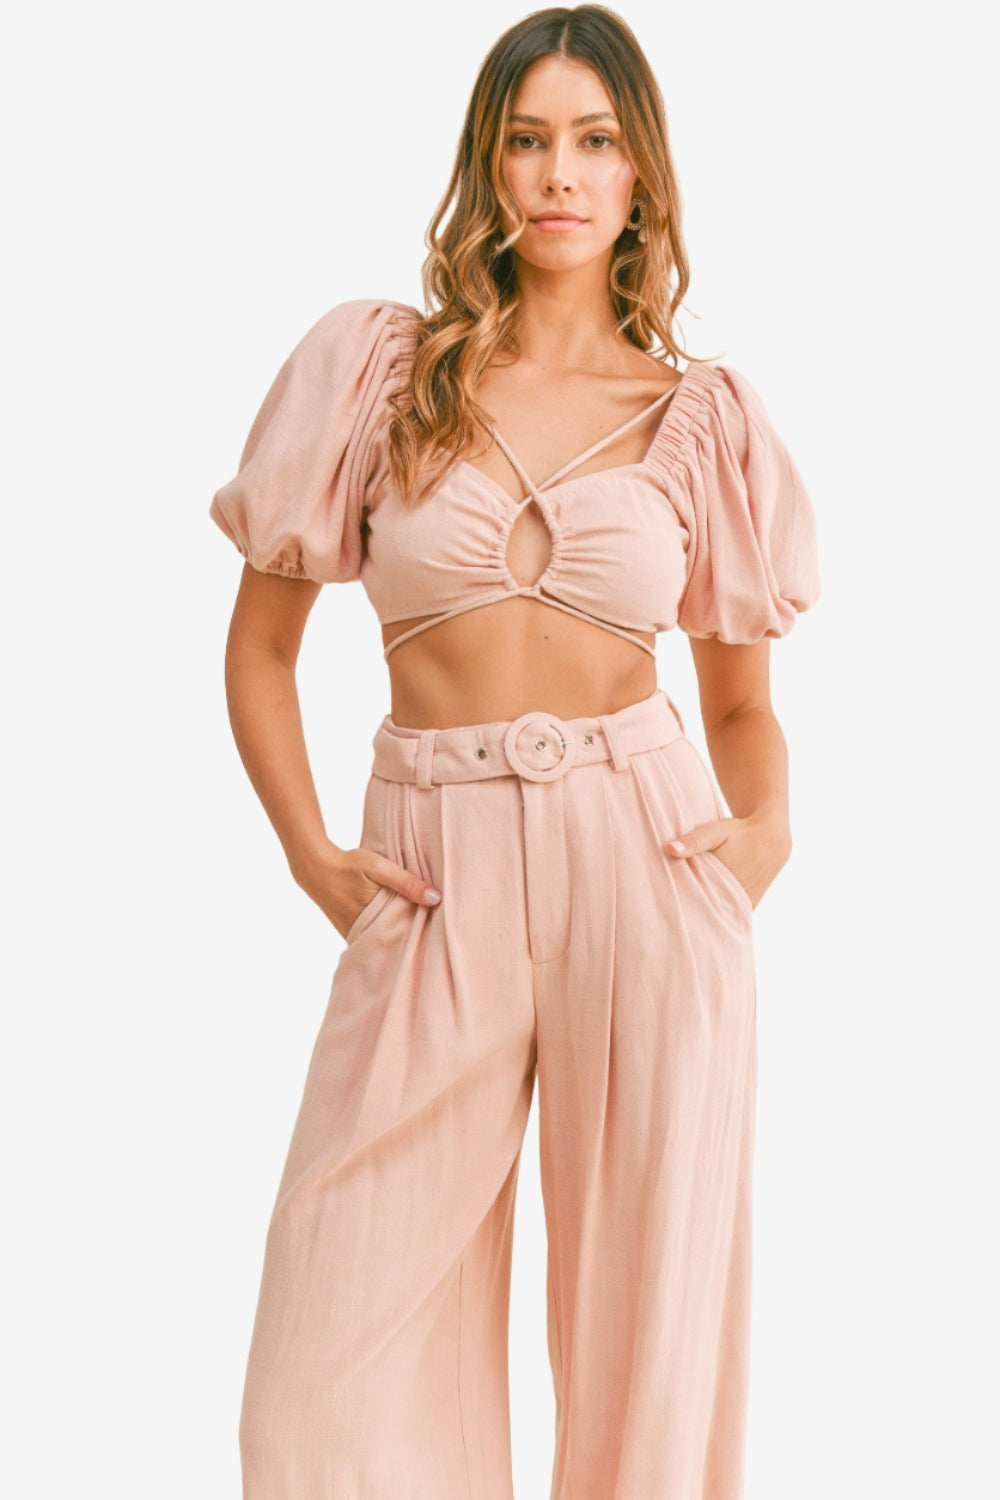 Fashion-forward woman in a cut out drawstring crop top and belted pants set, showcasing modern style.